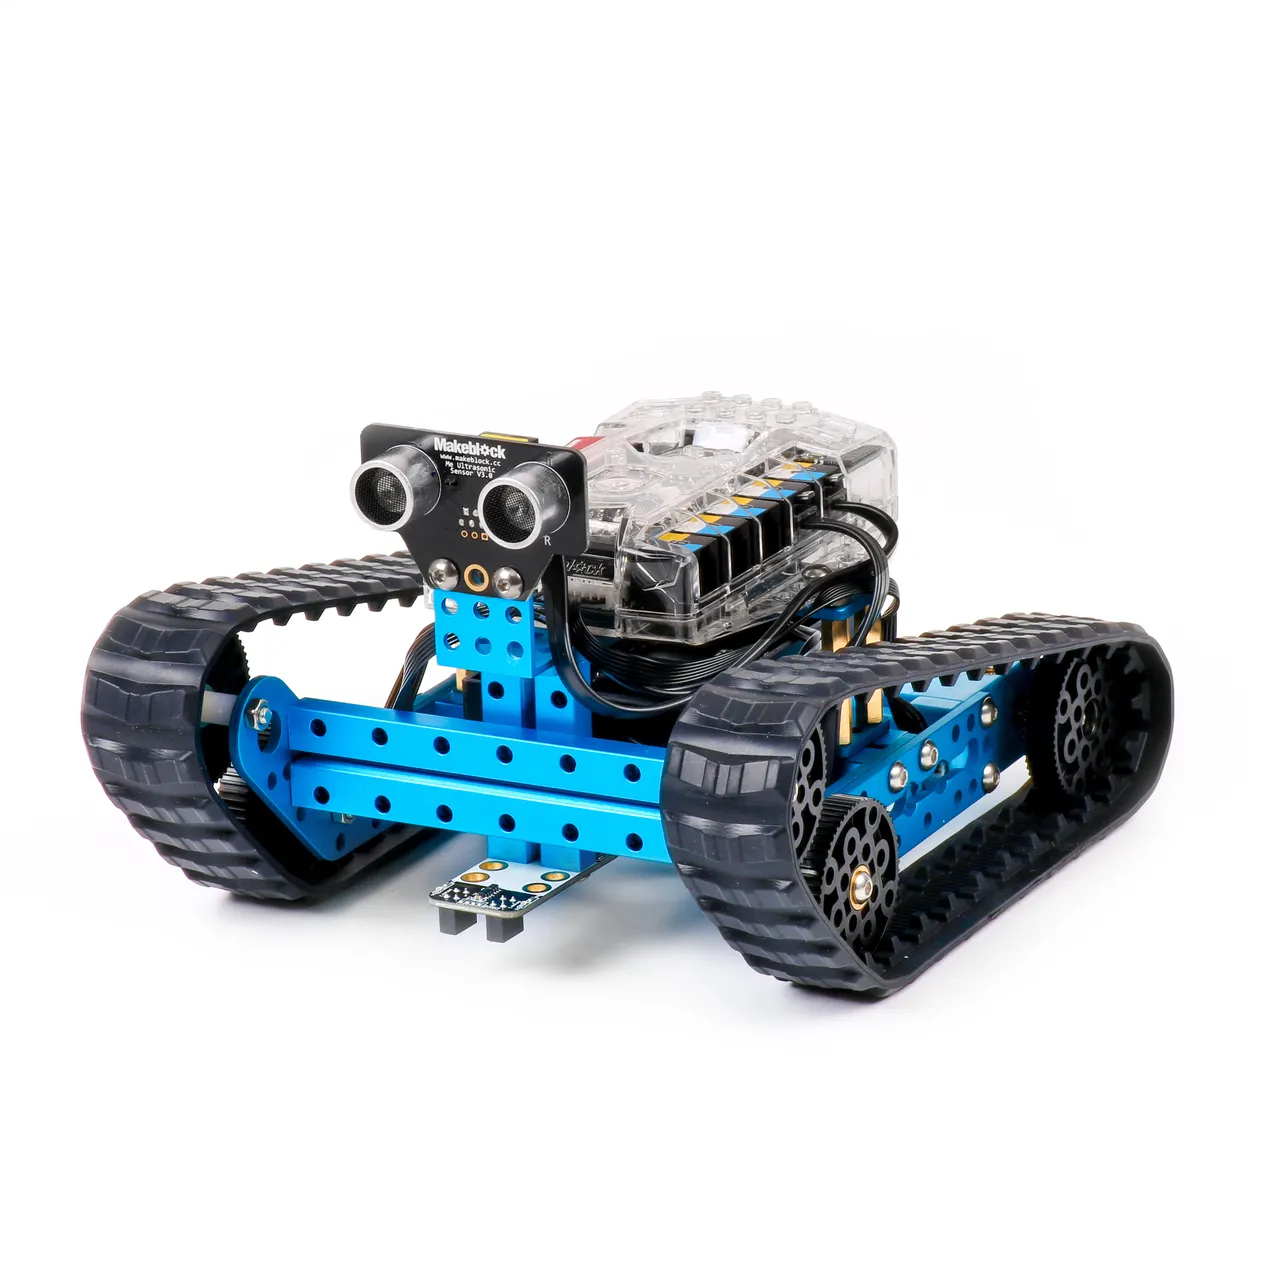 MBot robot kit BT version programmable children's intelligent learning puzzle robot toy